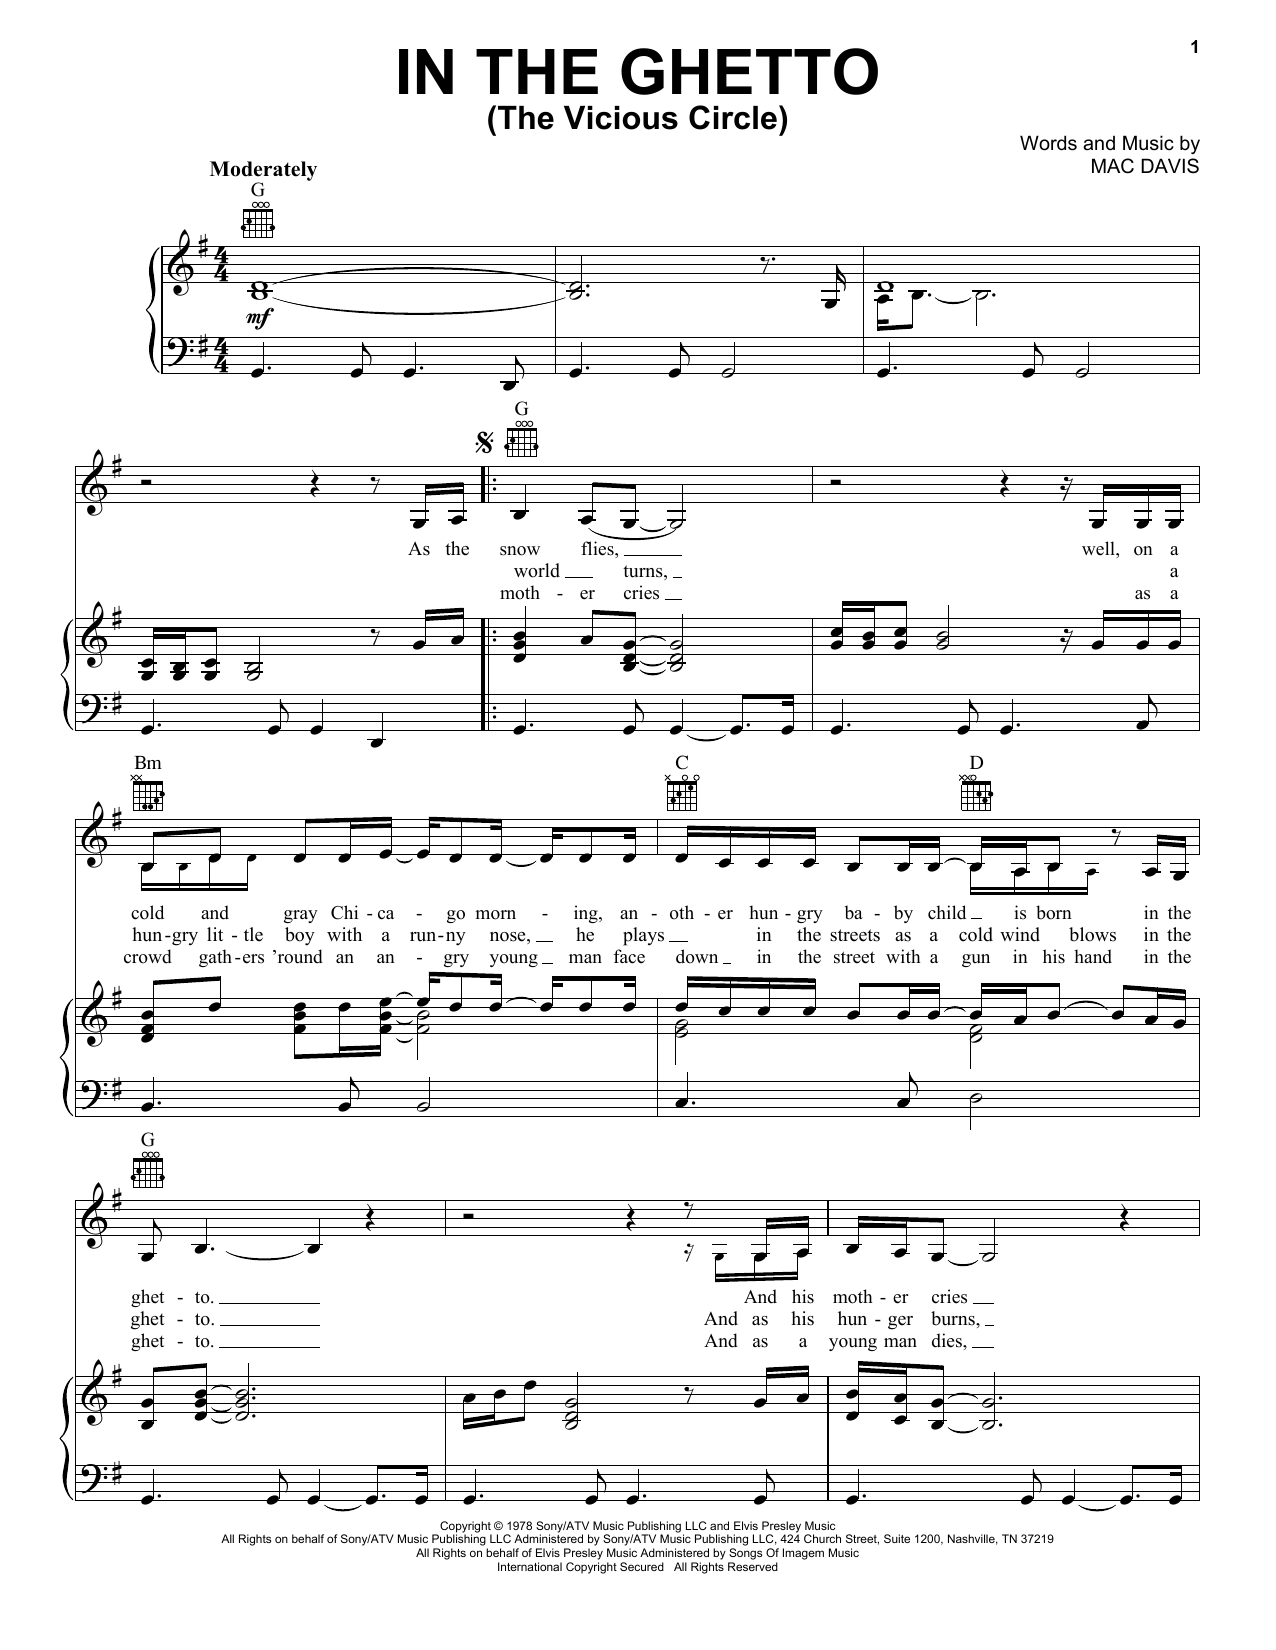 Download Elvis Presley In The Ghetto (The Vicious Circle) Sheet Music